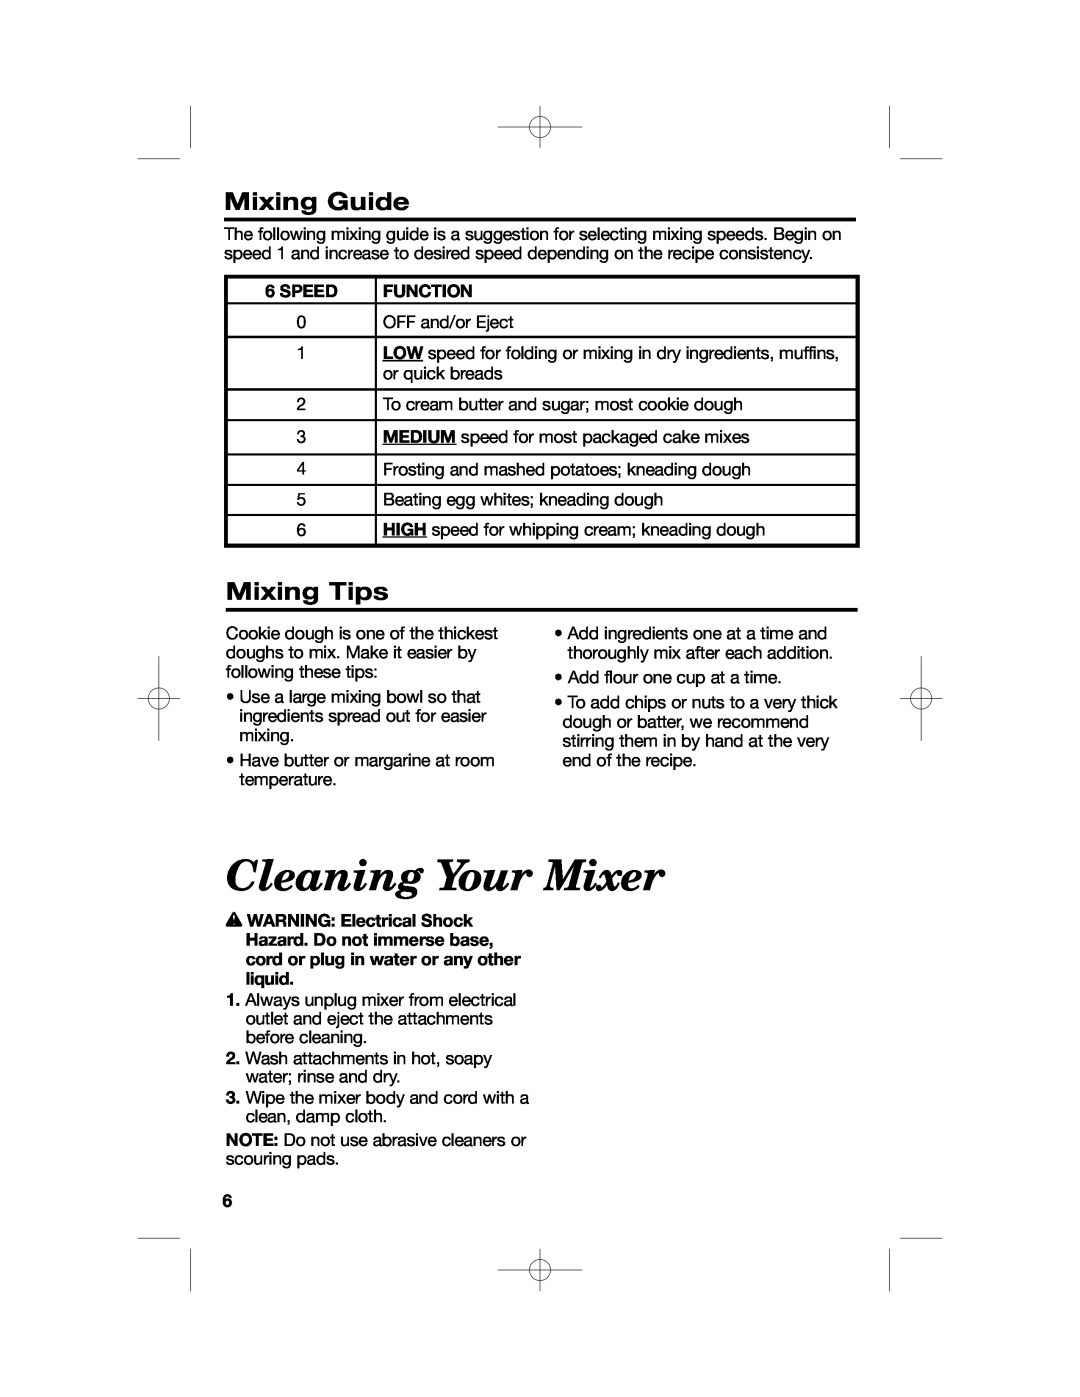 Hamilton Beach 64650 manual Cleaning Your Mixer, Mixing Guide, Mixing Tips, Speed, Function 